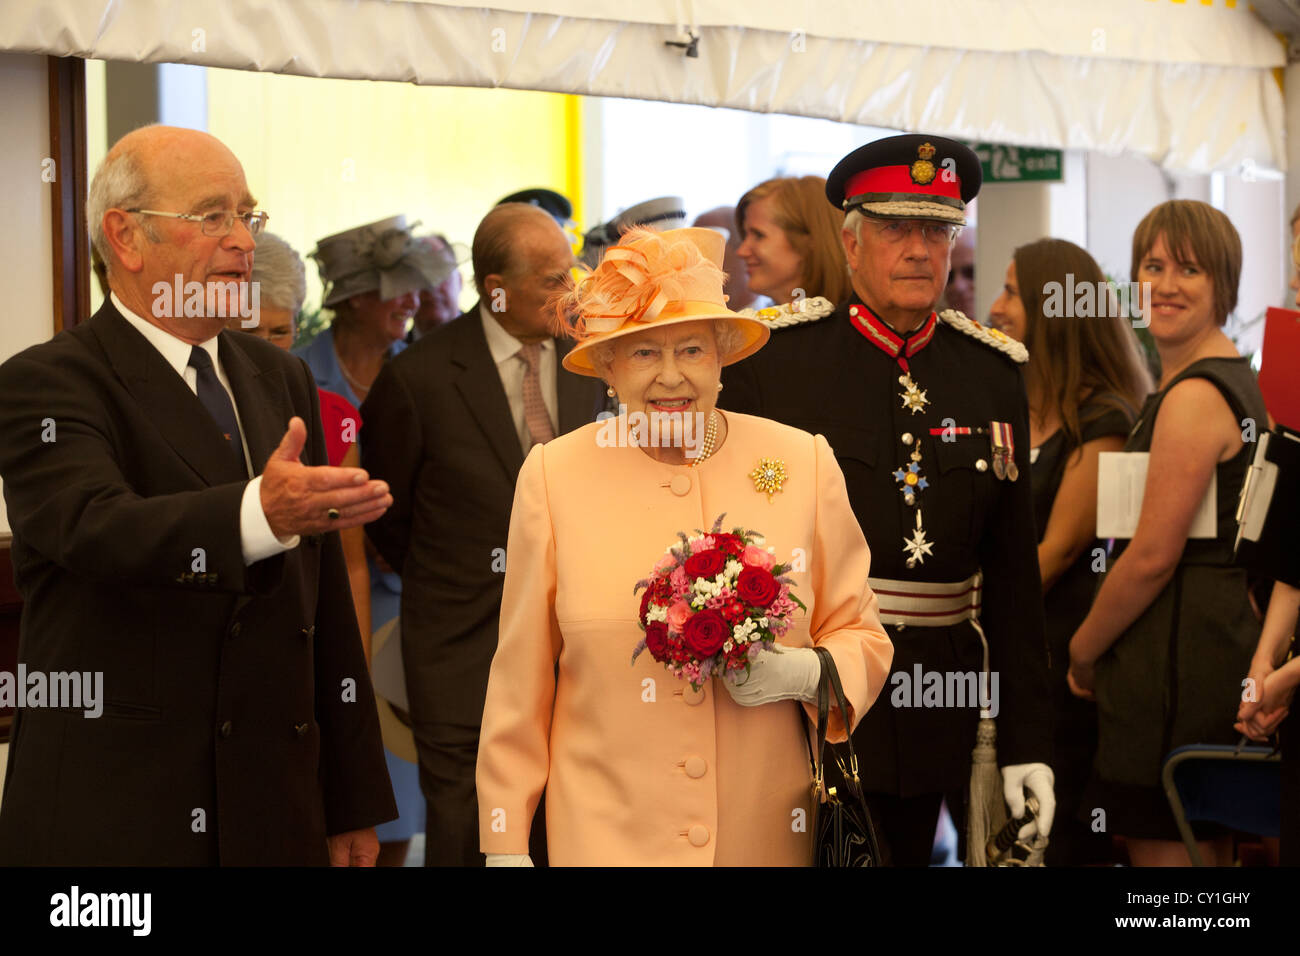 Her Majesty, Queen Elizabeth,2, II,the ,second, Jubilee, visit to, Cowes, Isle of Wight ,England, to open new ,RNLI  inshore ,lifeboat ,station, Stock Photo